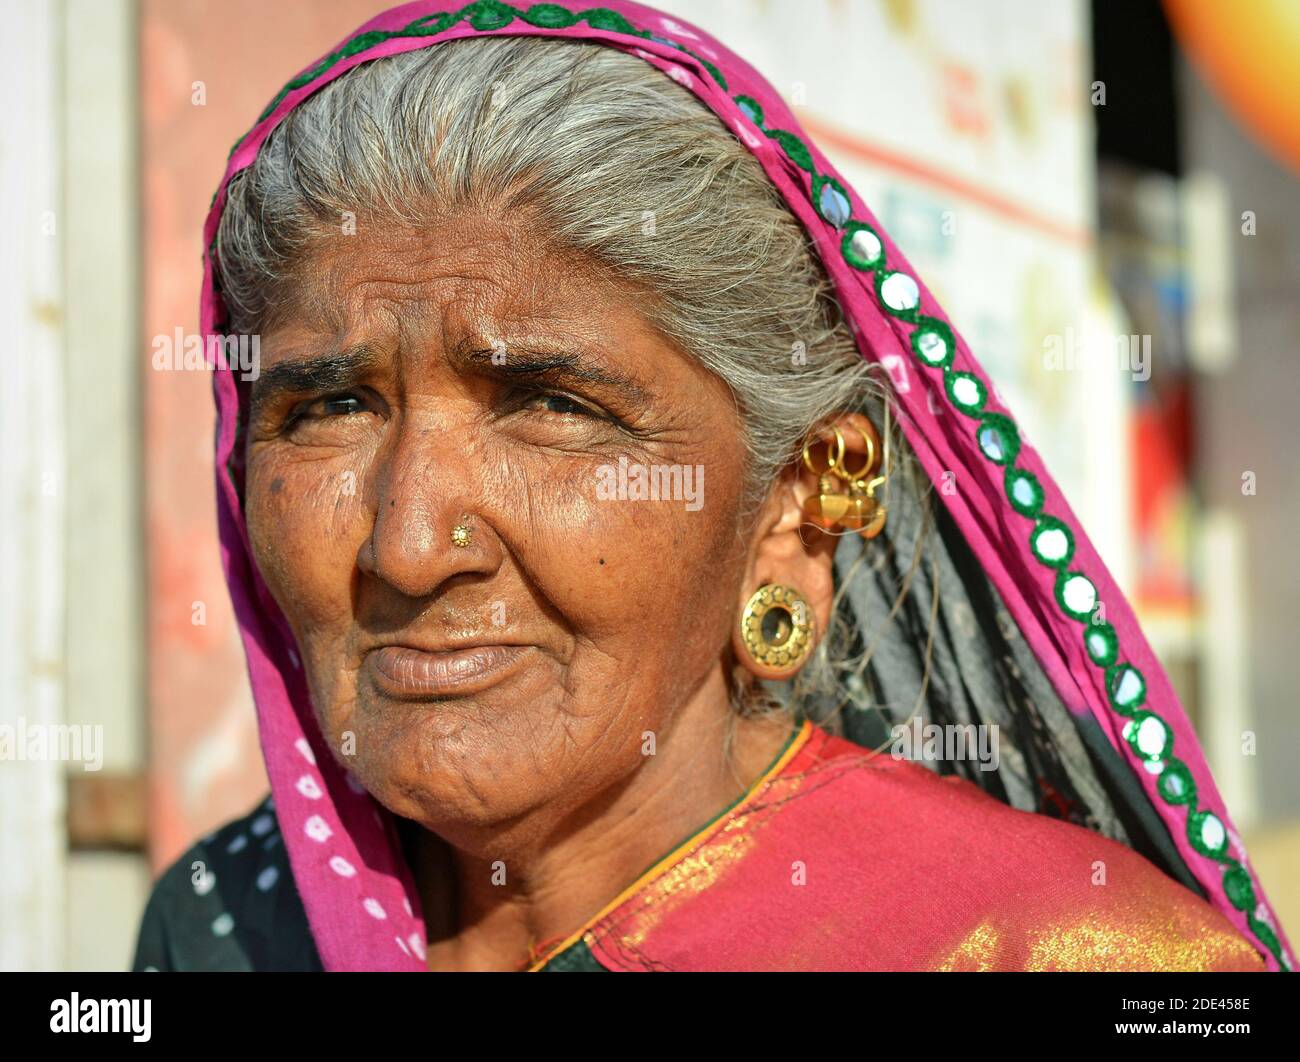 Old Indian Gujarati woman with elaborate ear jewelry (ear lobe plugs, ear helix piercings) and traditional head scarf (dupatta) poses for the camera. Stock Photo